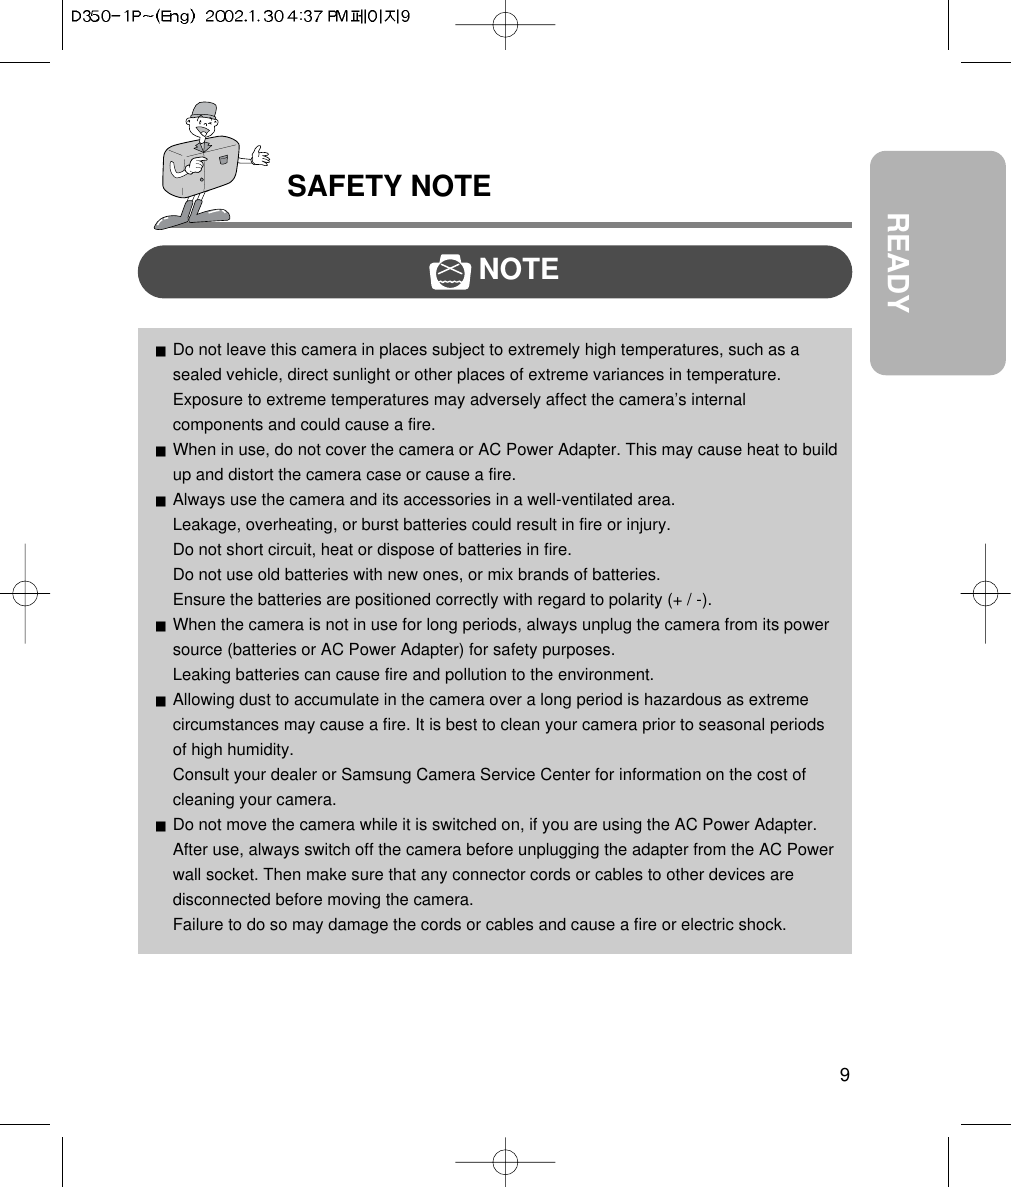 SAFETY NOTE9READYNOTEDo not leave this camera in places subject to extremely high temperatures, such as asealed vehicle, direct sunlight or other places of extreme variances in temperature.Exposure to extreme temperatures may adversely affect the camera’s internalcomponents and could cause a fire.When in use, do not cover the camera or AC Power Adapter. This may cause heat to buildup and distort the camera case or cause a fire.Always use the camera and its accessories in a well-ventilated area.Leakage, overheating, or burst batteries could result in fire or injury.Do not short circuit, heat or dispose of batteries in fire.Do not use old batteries with new ones, or mix brands of batteries.Ensure the batteries are positioned correctly with regard to polarity (+ / -).When the camera is not in use for long periods, always unplug the camera from its powersource (batteries or AC Power Adapter) for safety purposes.Leaking batteries can cause fire and pollution to the environment.Allowing dust to accumulate in the camera over a long period is hazardous as extremecircumstances may cause a fire. It is best to clean your camera prior to seasonal periodsof high humidity.Consult your dealer or Samsung Camera Service Center for information on the cost ofcleaning your camera.Do not move the camera while it is switched on, if you are using the AC Power Adapter.After use, always switch off the camera before unplugging the adapter from the AC Powerwall socket. Then make sure that any connector cords or cables to other devices aredisconnected before moving the camera.Failure to do so may damage the cords or cables and cause a fire or electric shock.